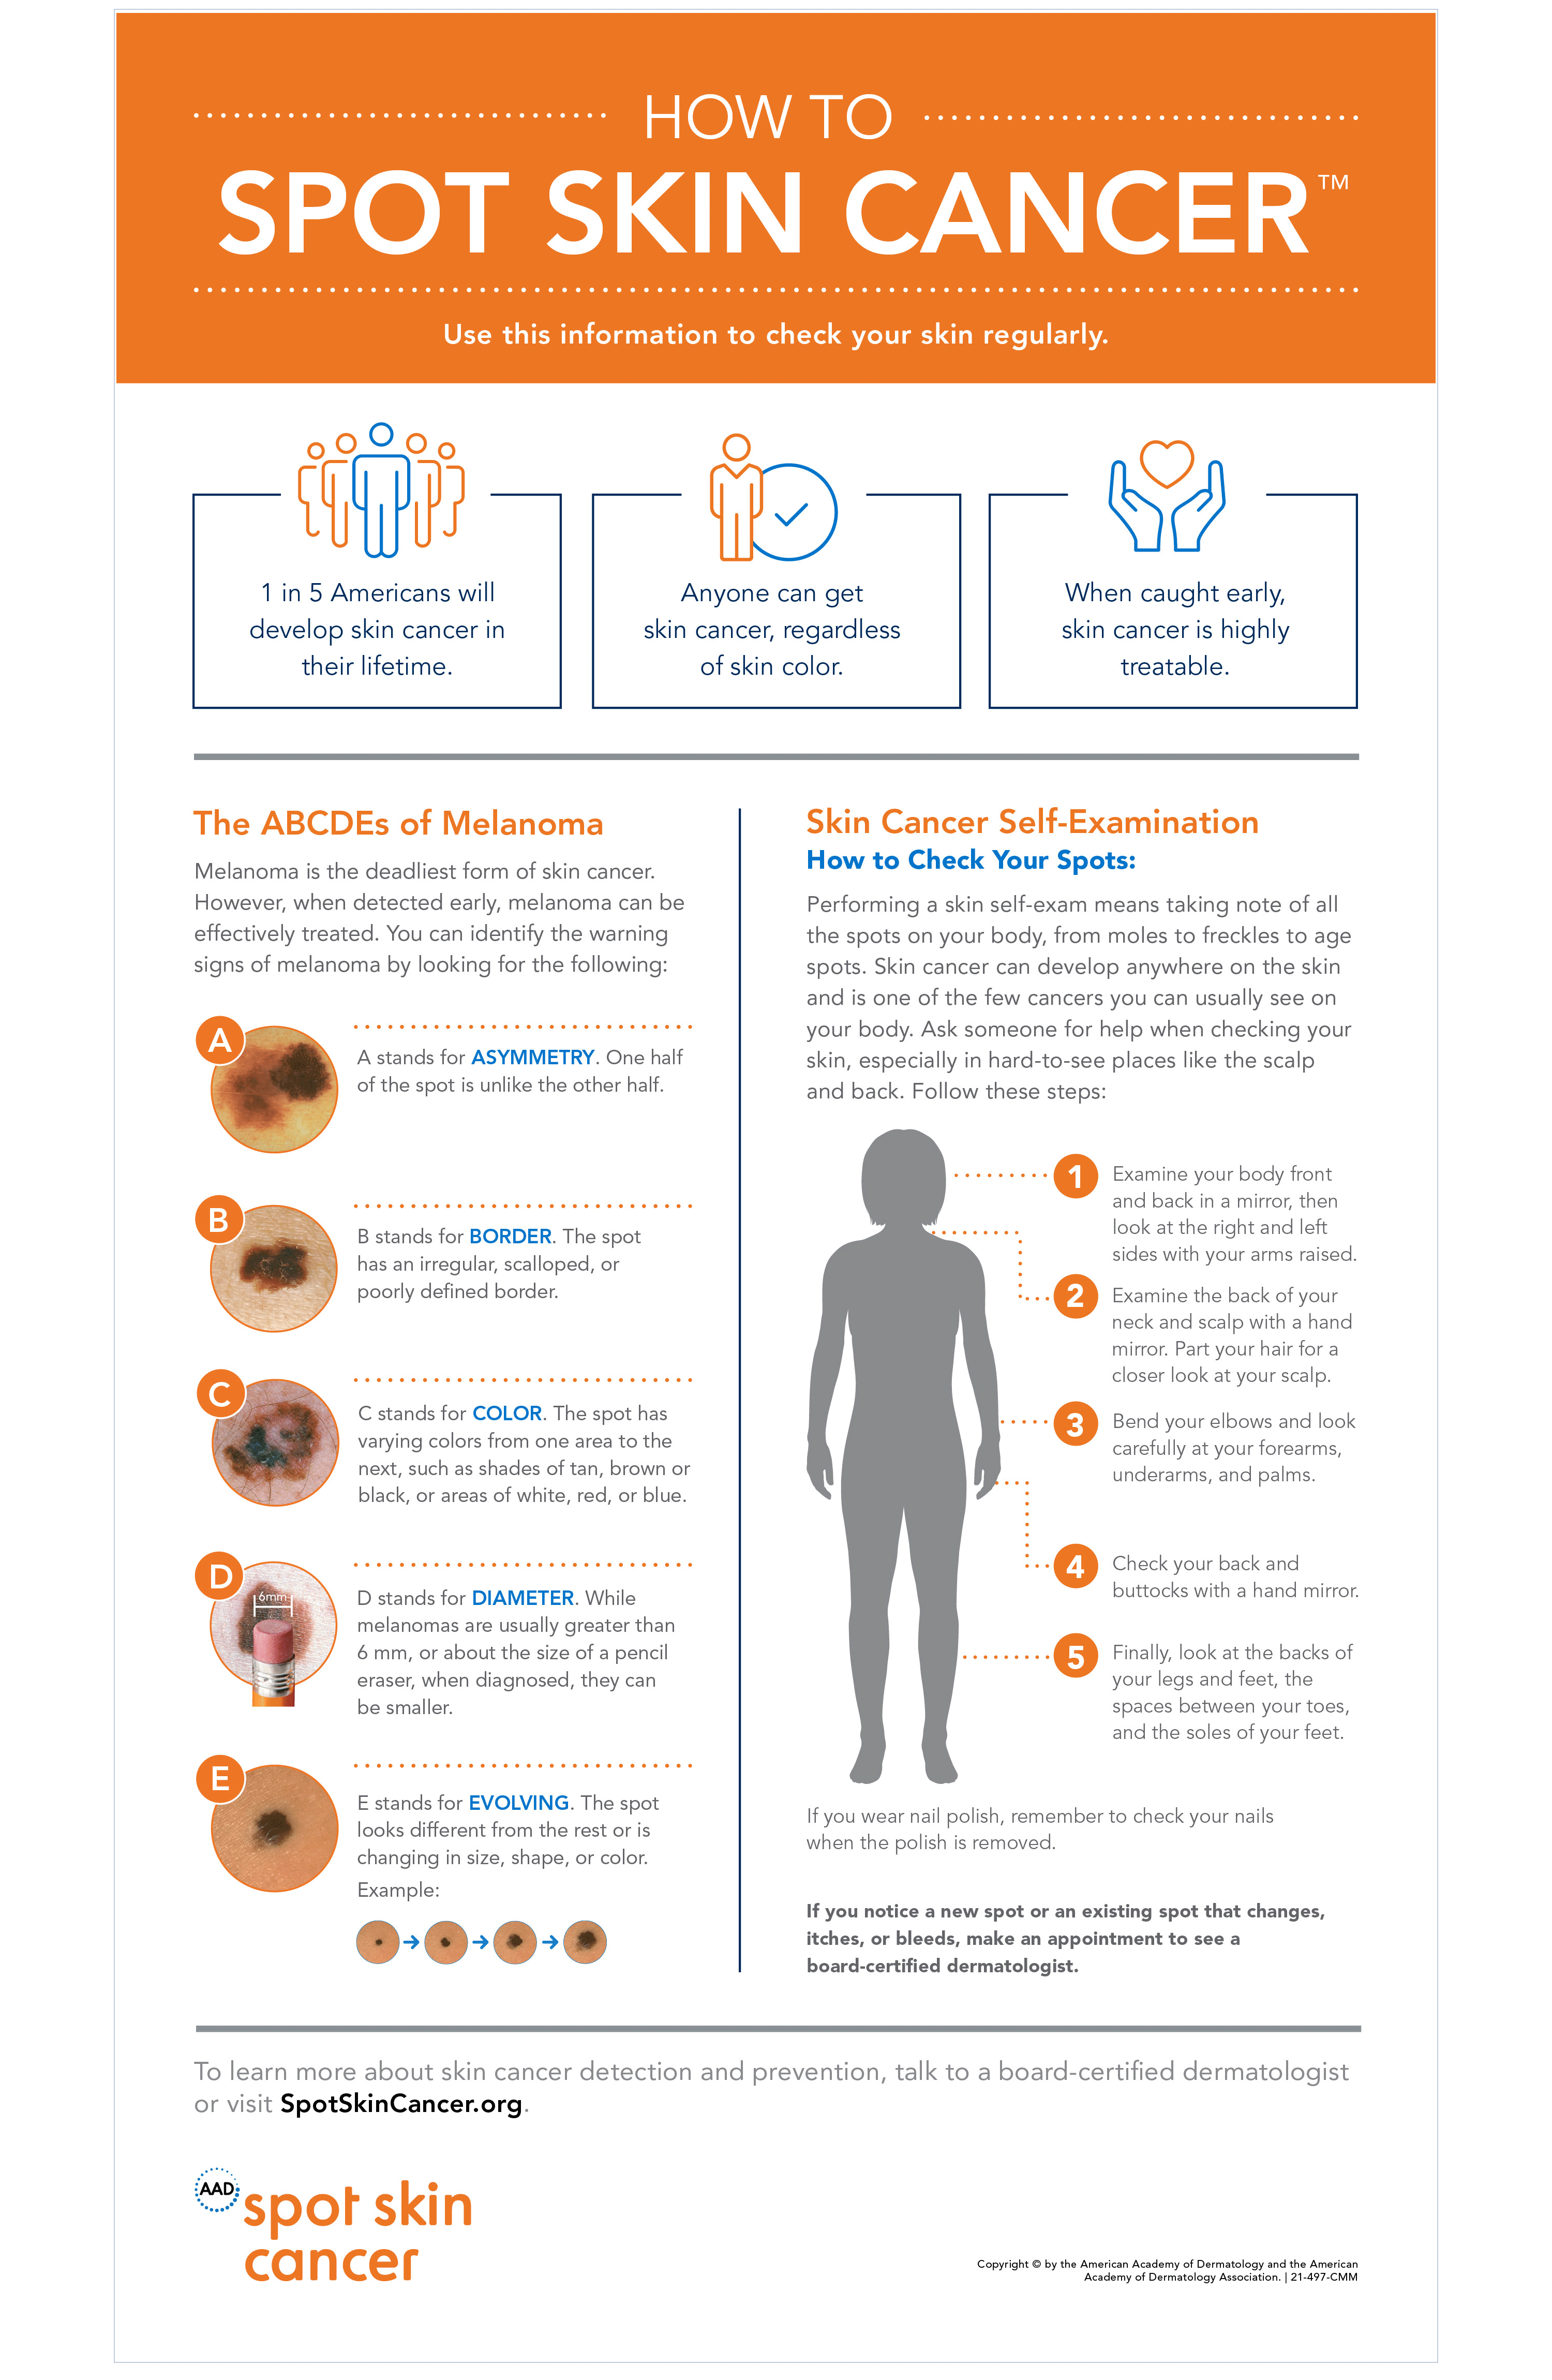 Use the information in this infographic to check your skin regularly.